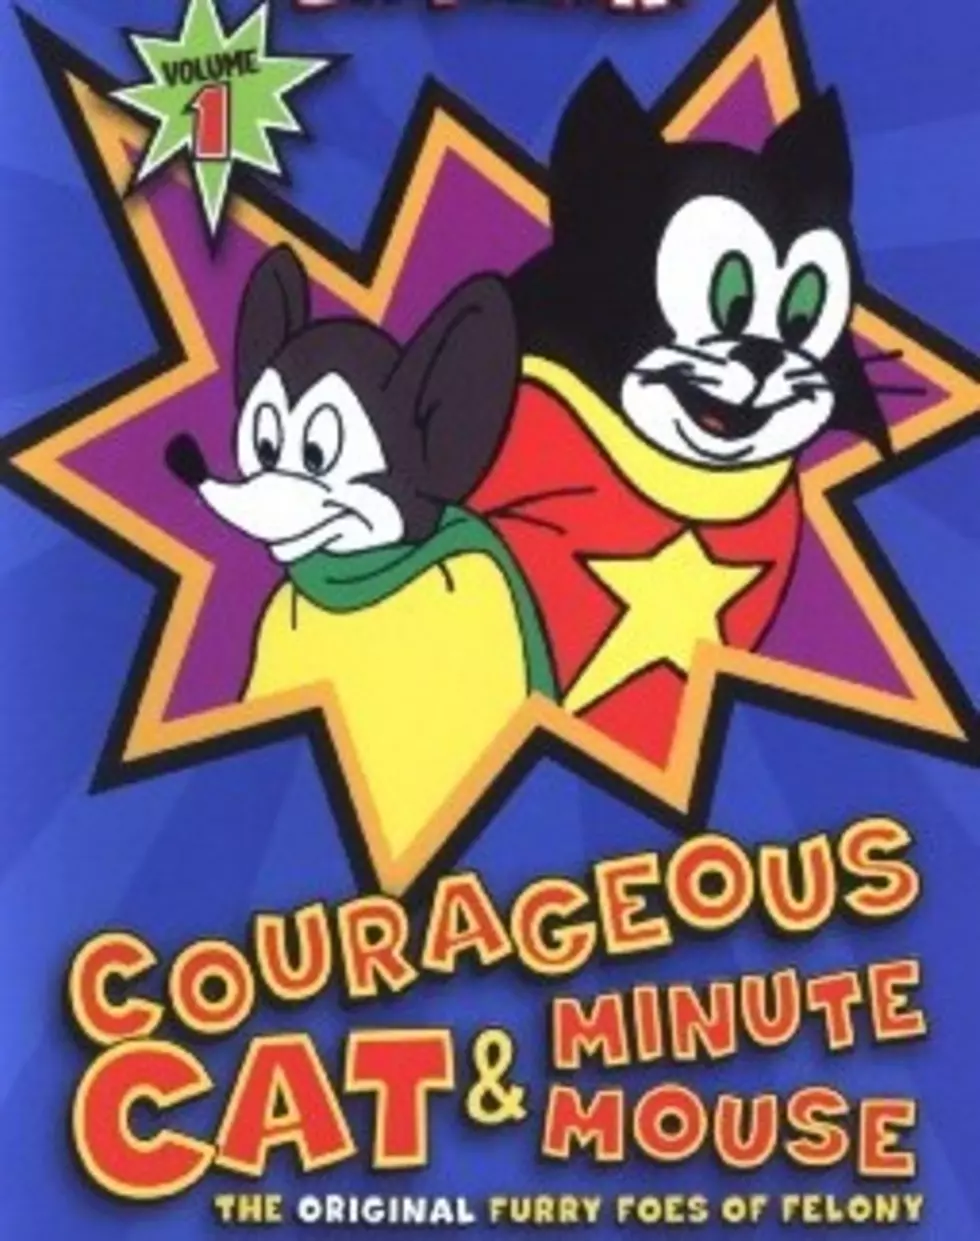 Throwback Thursday &#8211; Courageous Cat and Minute Mouse.